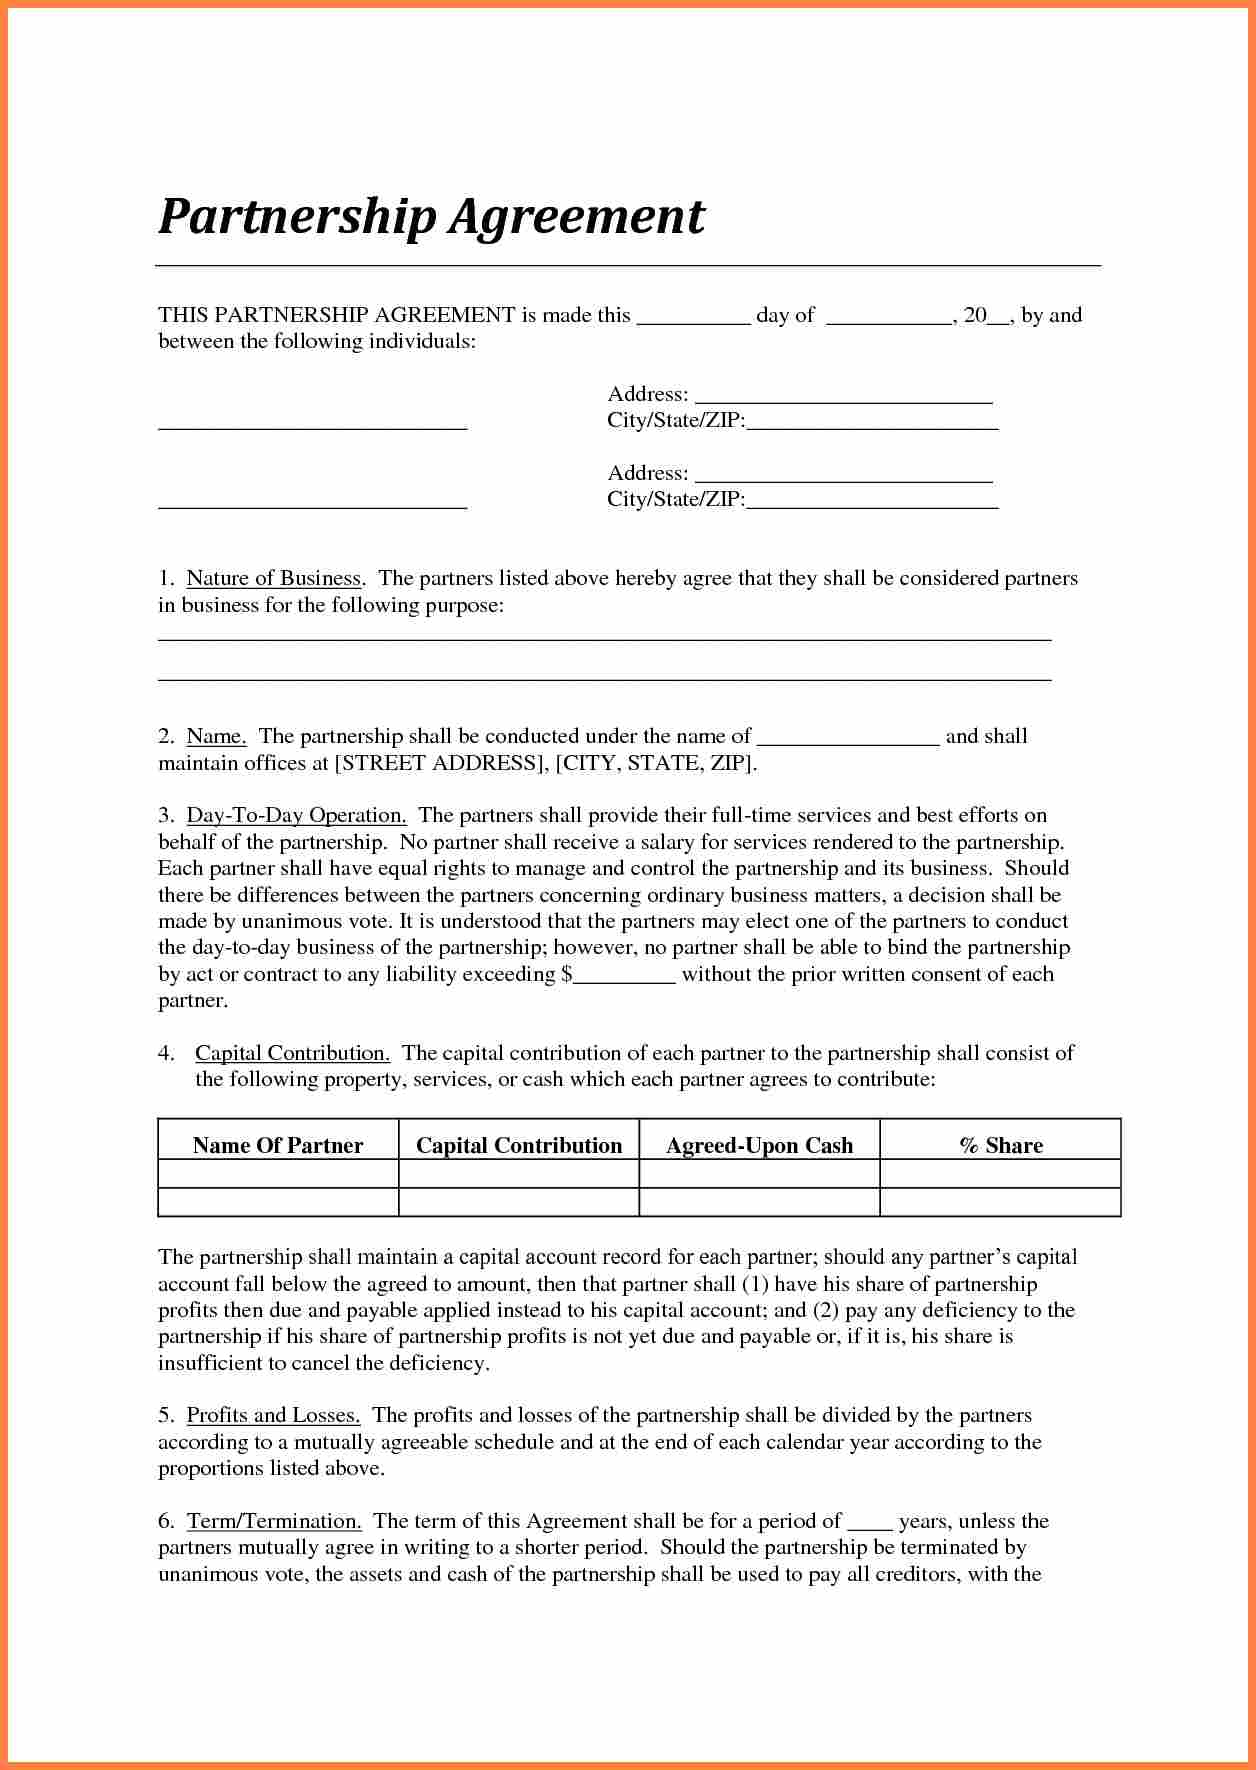 Legal Agreement Between Two Parties 002 Template Ideas Standard Partnership Agreement Of Contract Sample